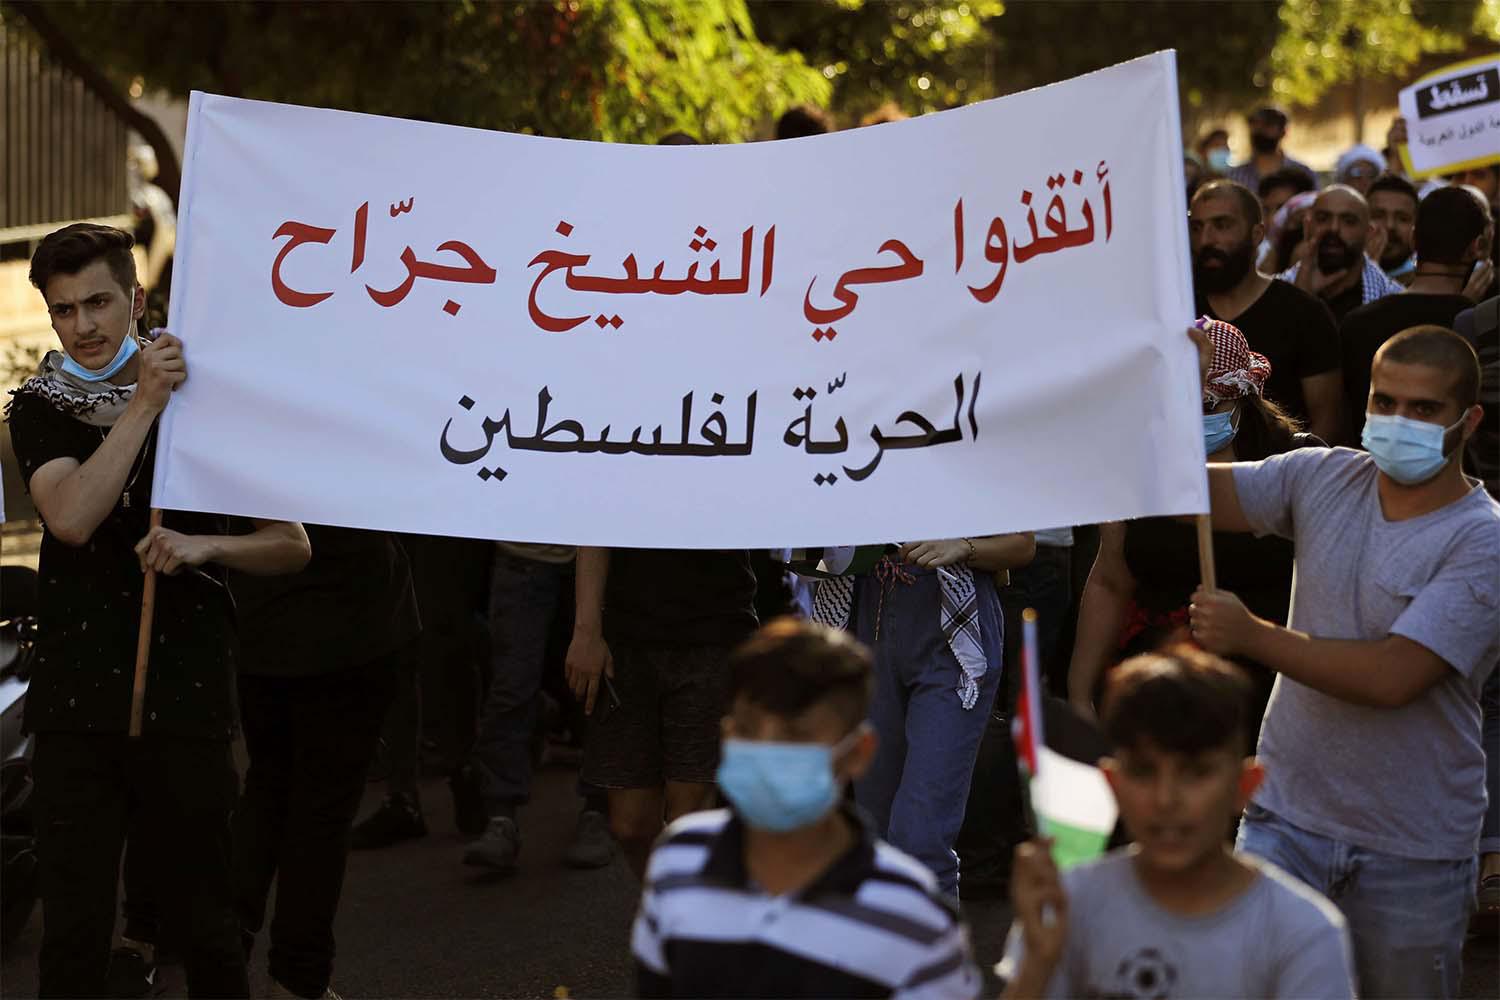 Protesters carry an Arabic banner that reads: "Save the Sheikh Jarrah neighborhood, Freedom for Palestine"